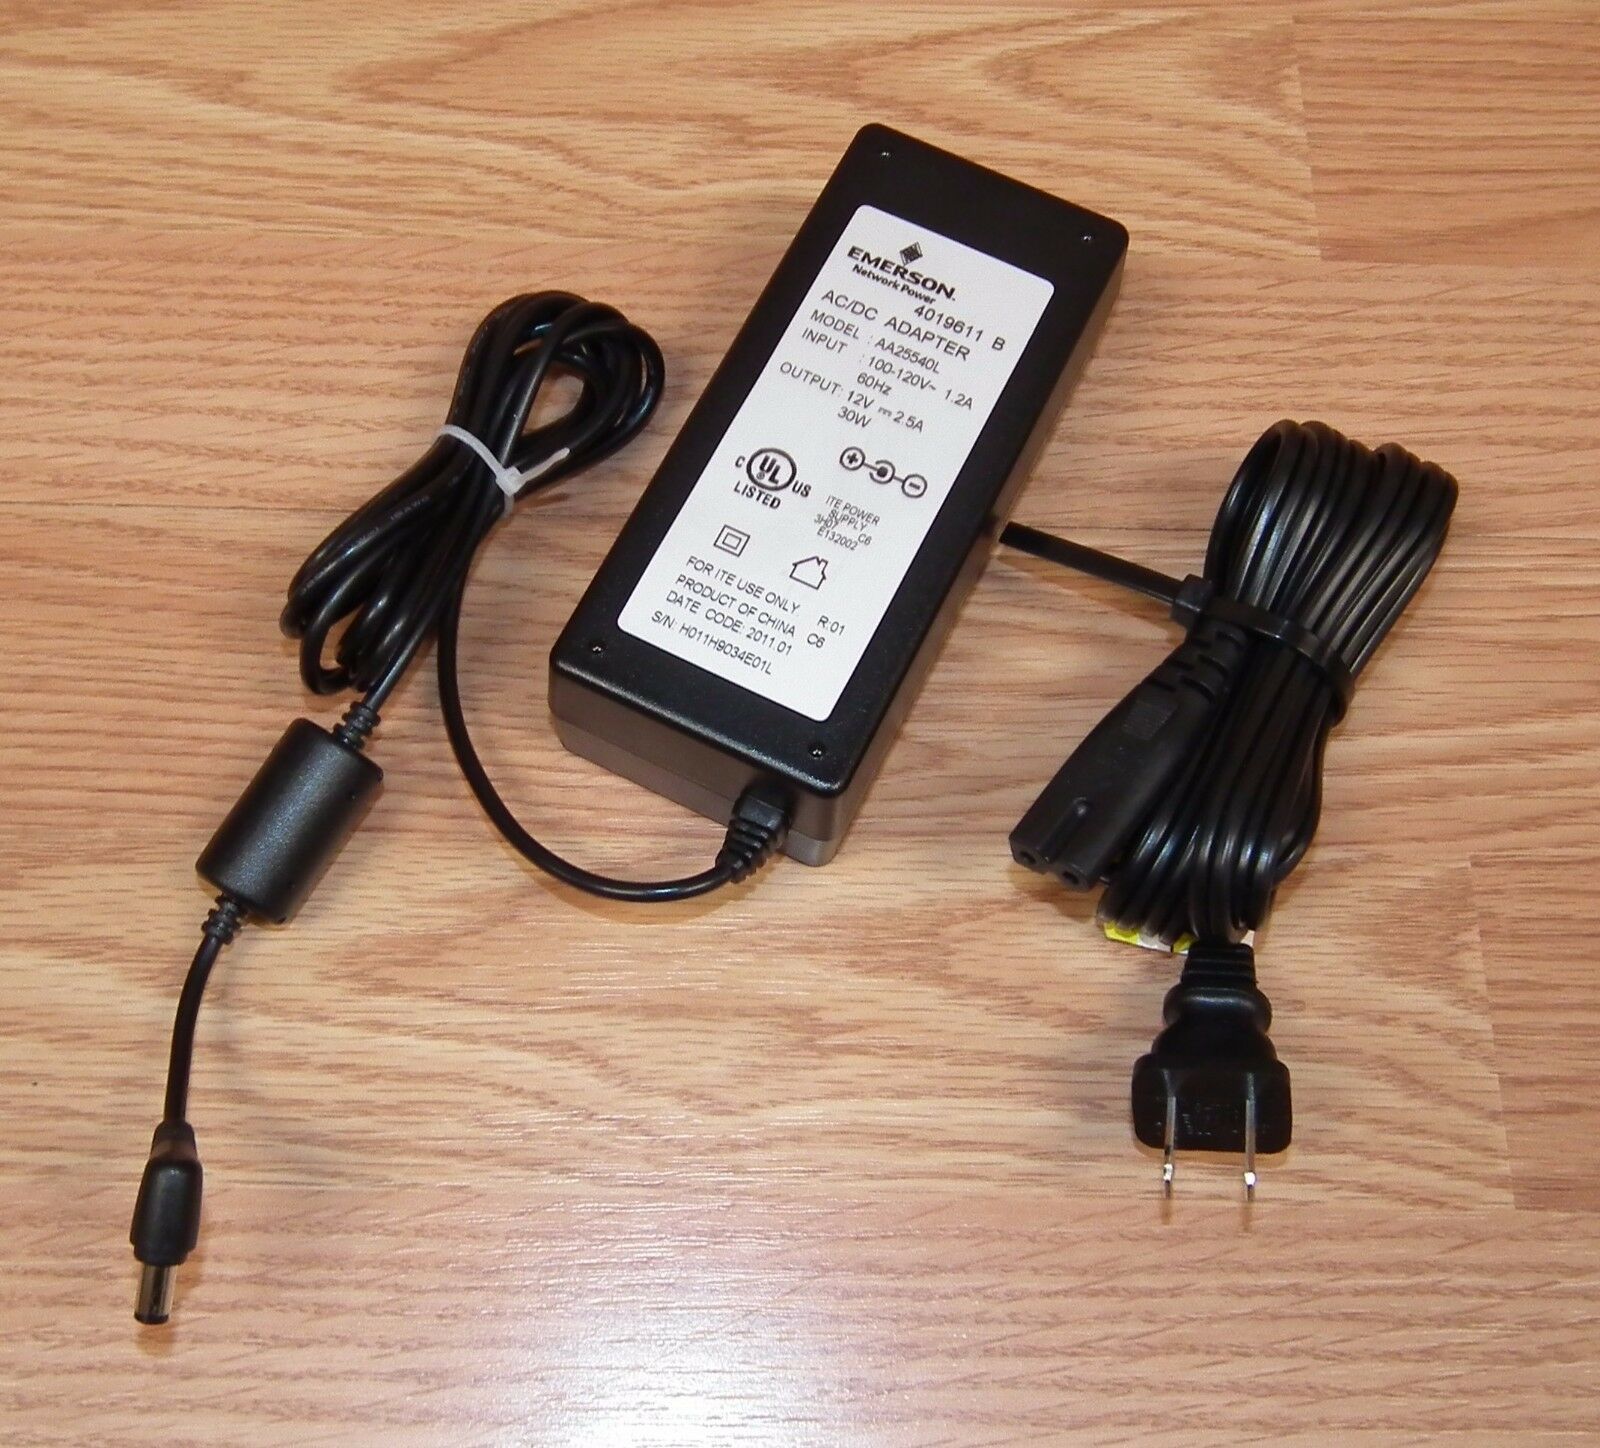 *NEW* Emerson AA25540L 12V 30W 2.5A AC DC Adapter Power Supply Charger